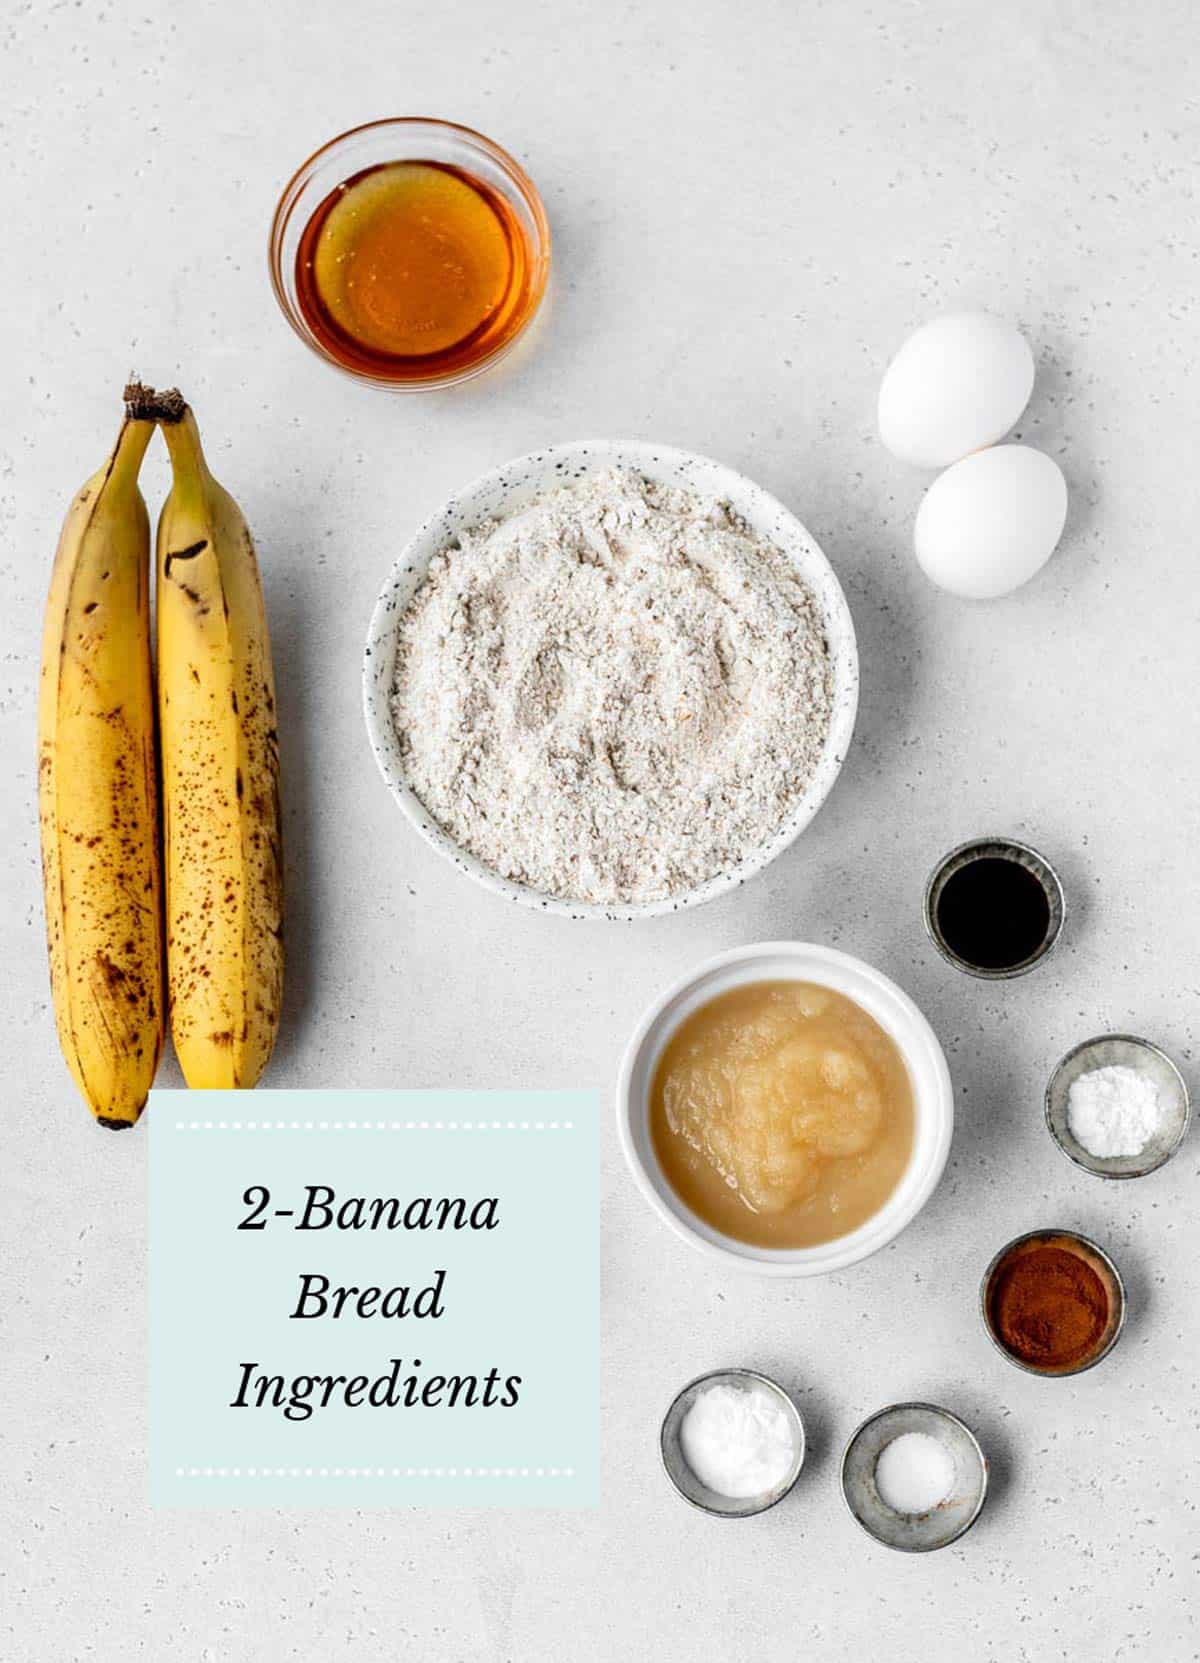 Two banana bread ingredients, including  bananas, flour, honey, applesauce, cinnamon and two eggs.